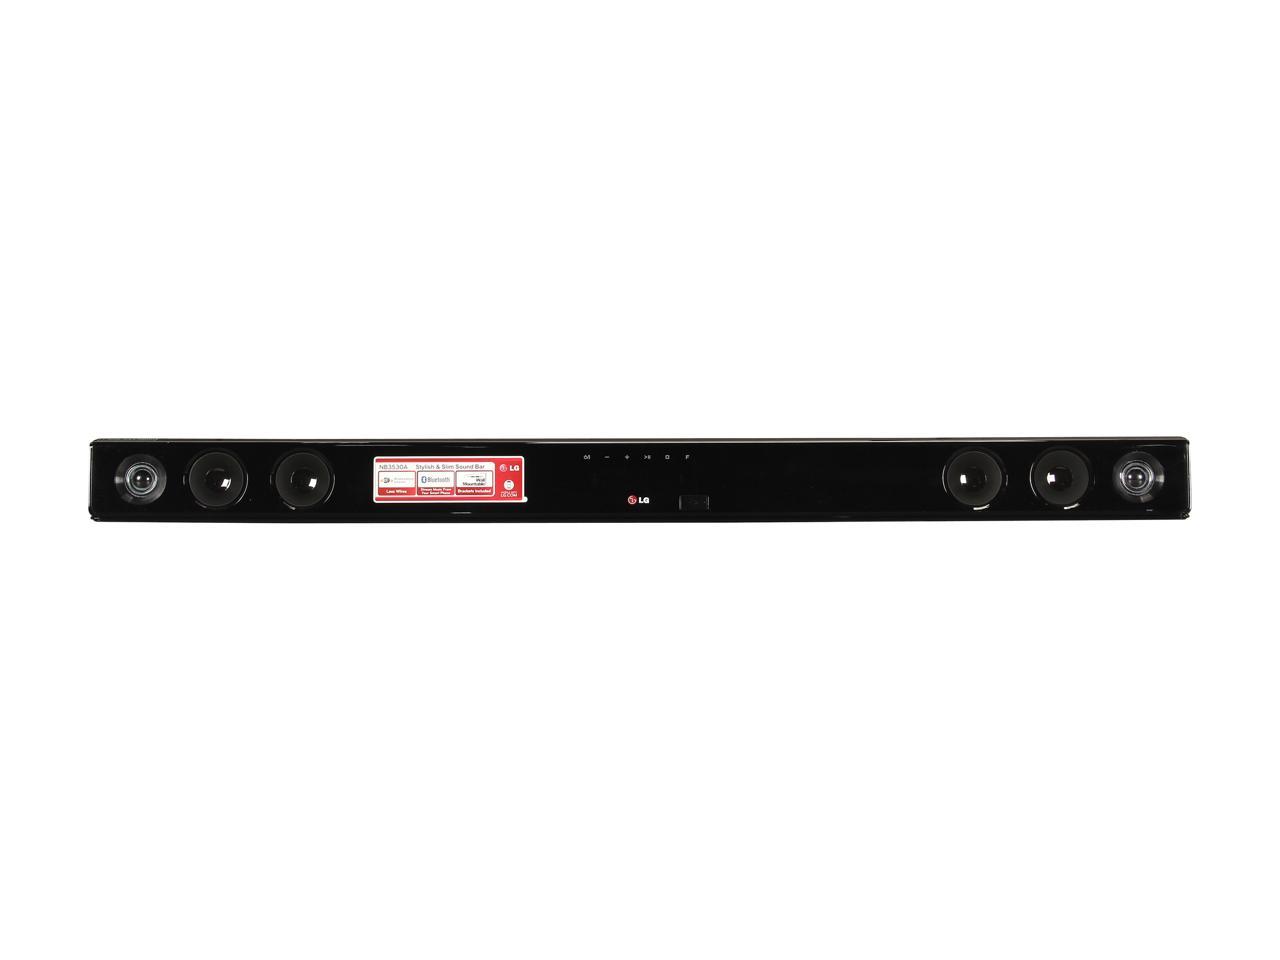 LG NB3530A 2.1 CH Sound Bar with Wireless Subwoofer System